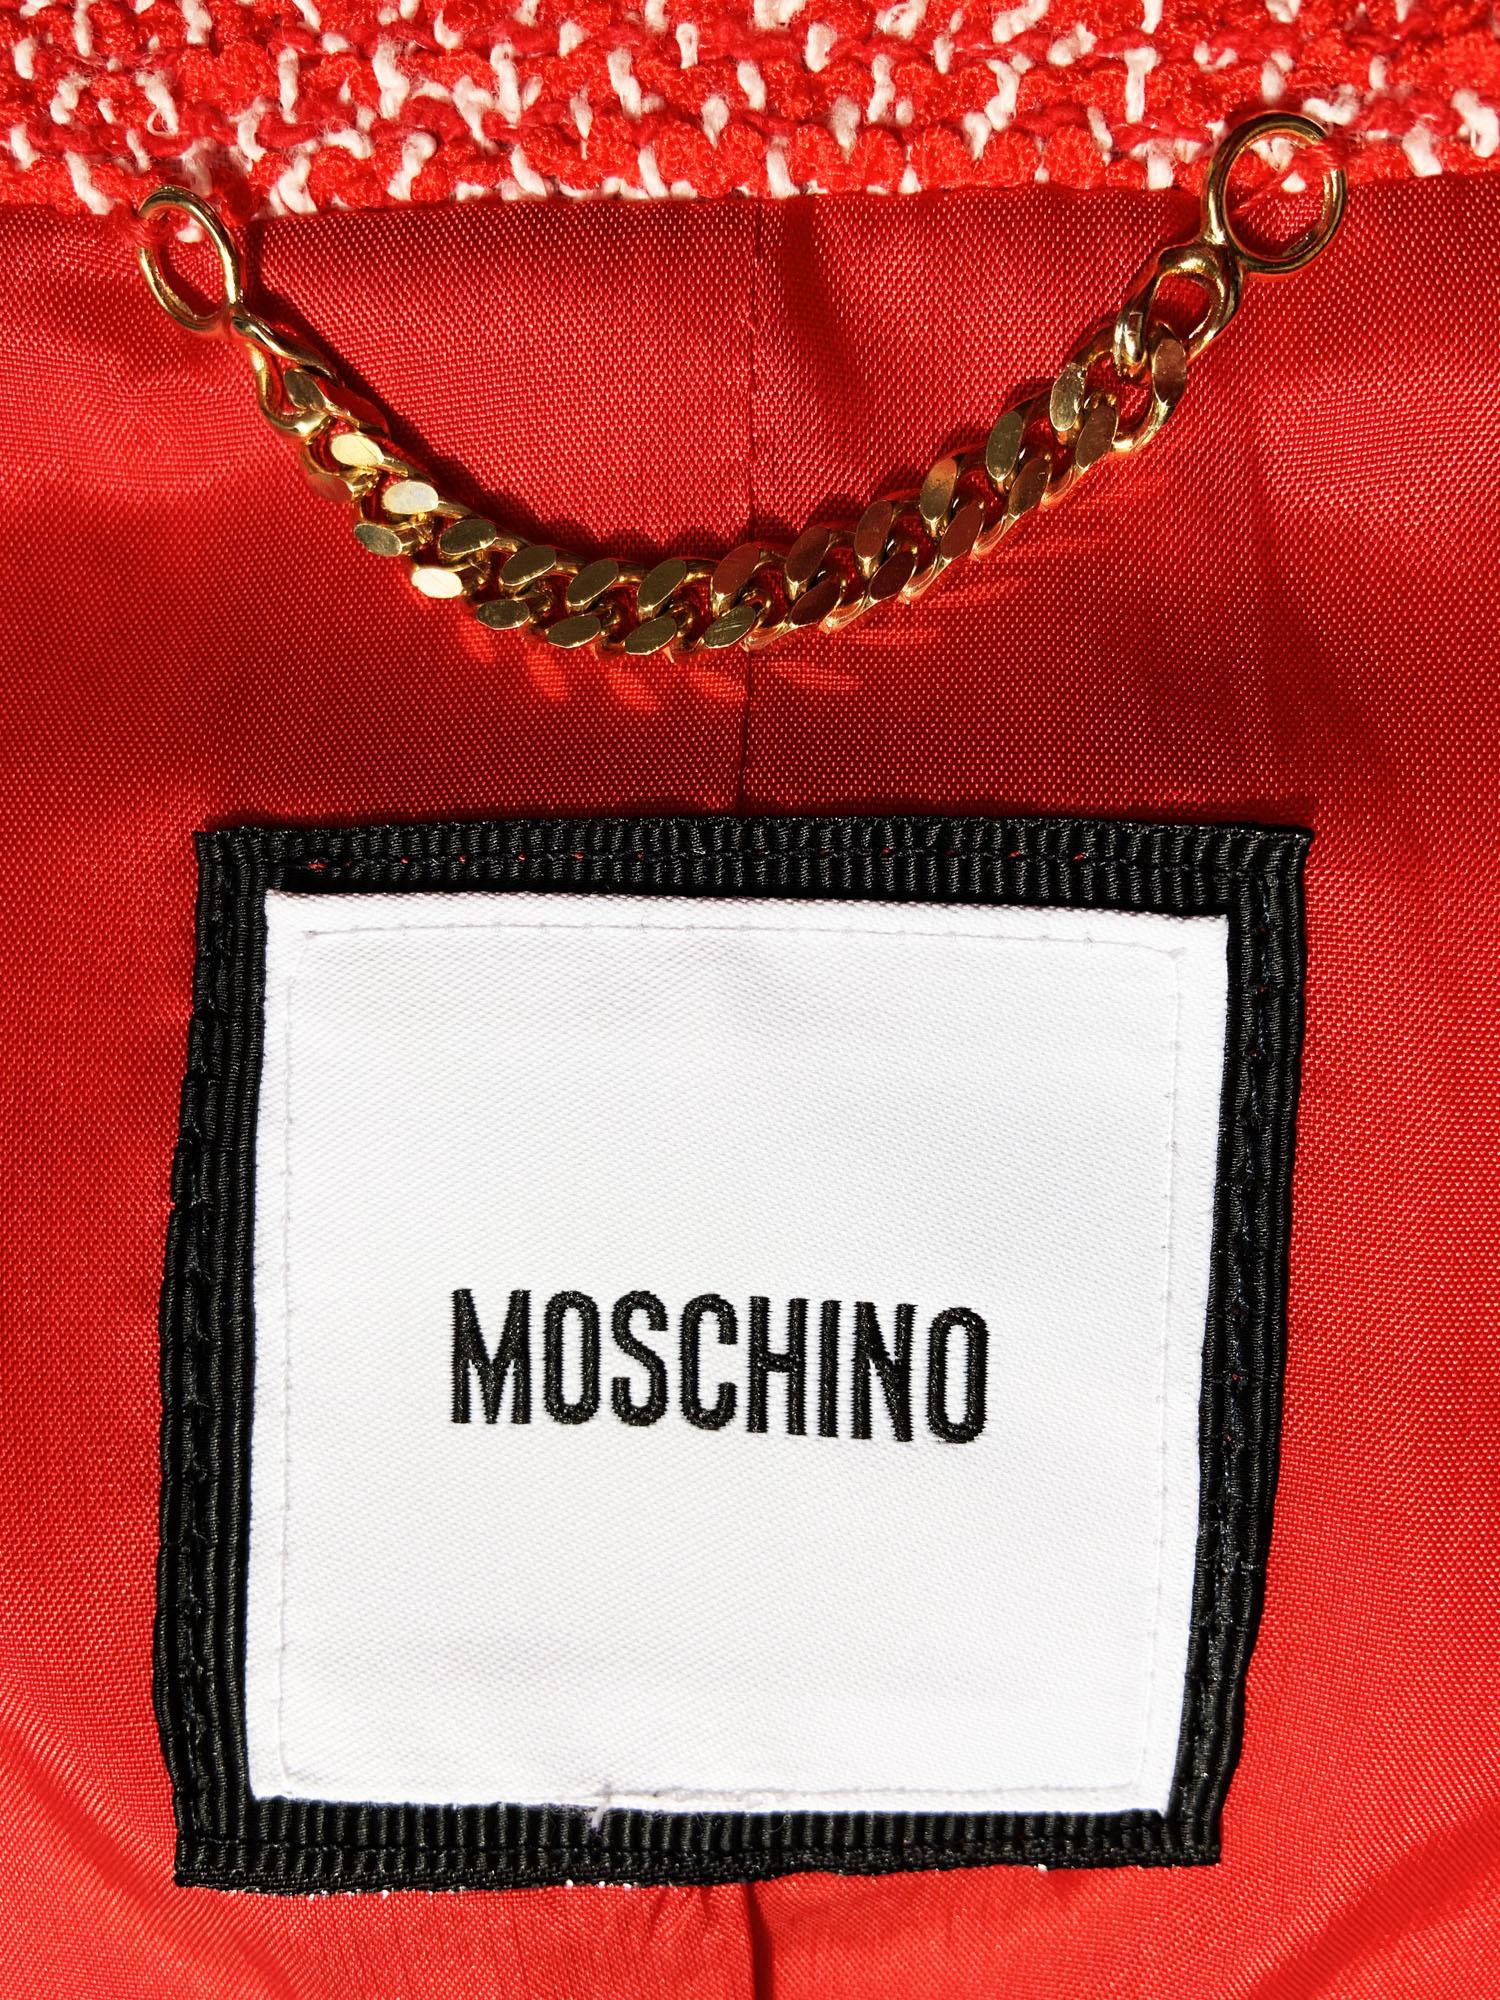 Moschino Pearl Embellished Red Peplum Boucle Jacket Italian 46 - US 12 For Sale 3